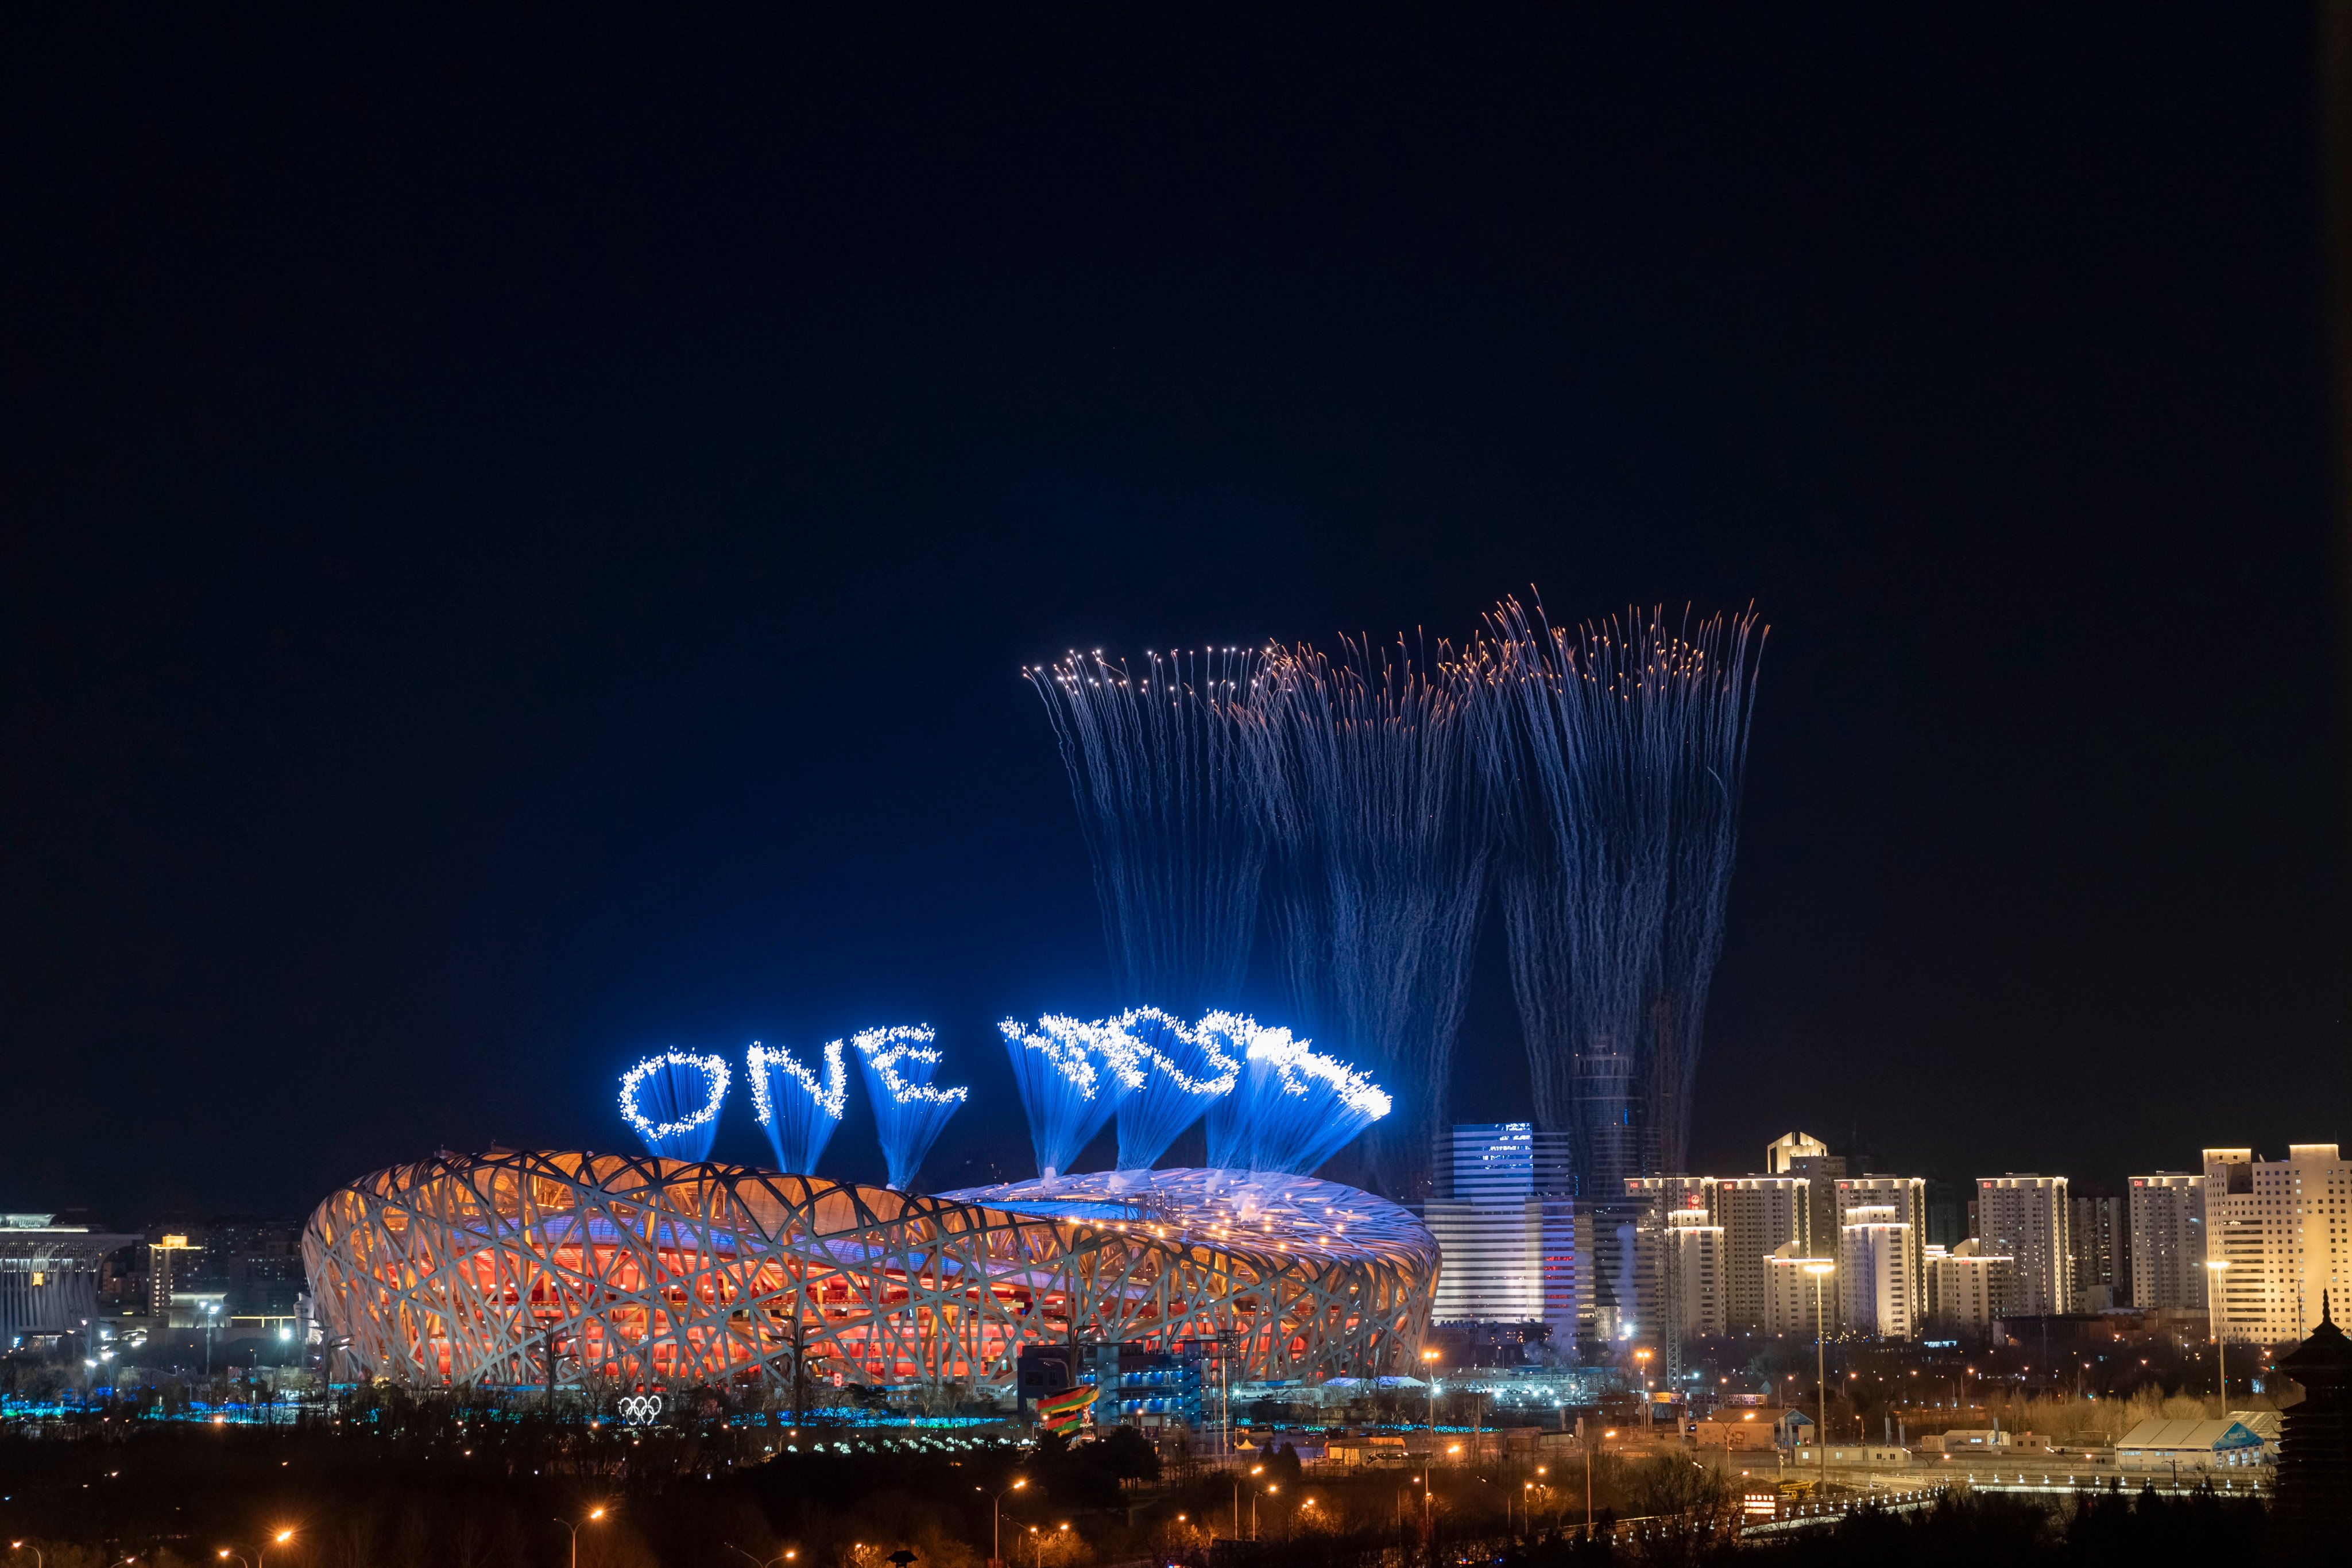 The Closing Ceremony Firework of the 2022 Beijing Winter Olympic Games